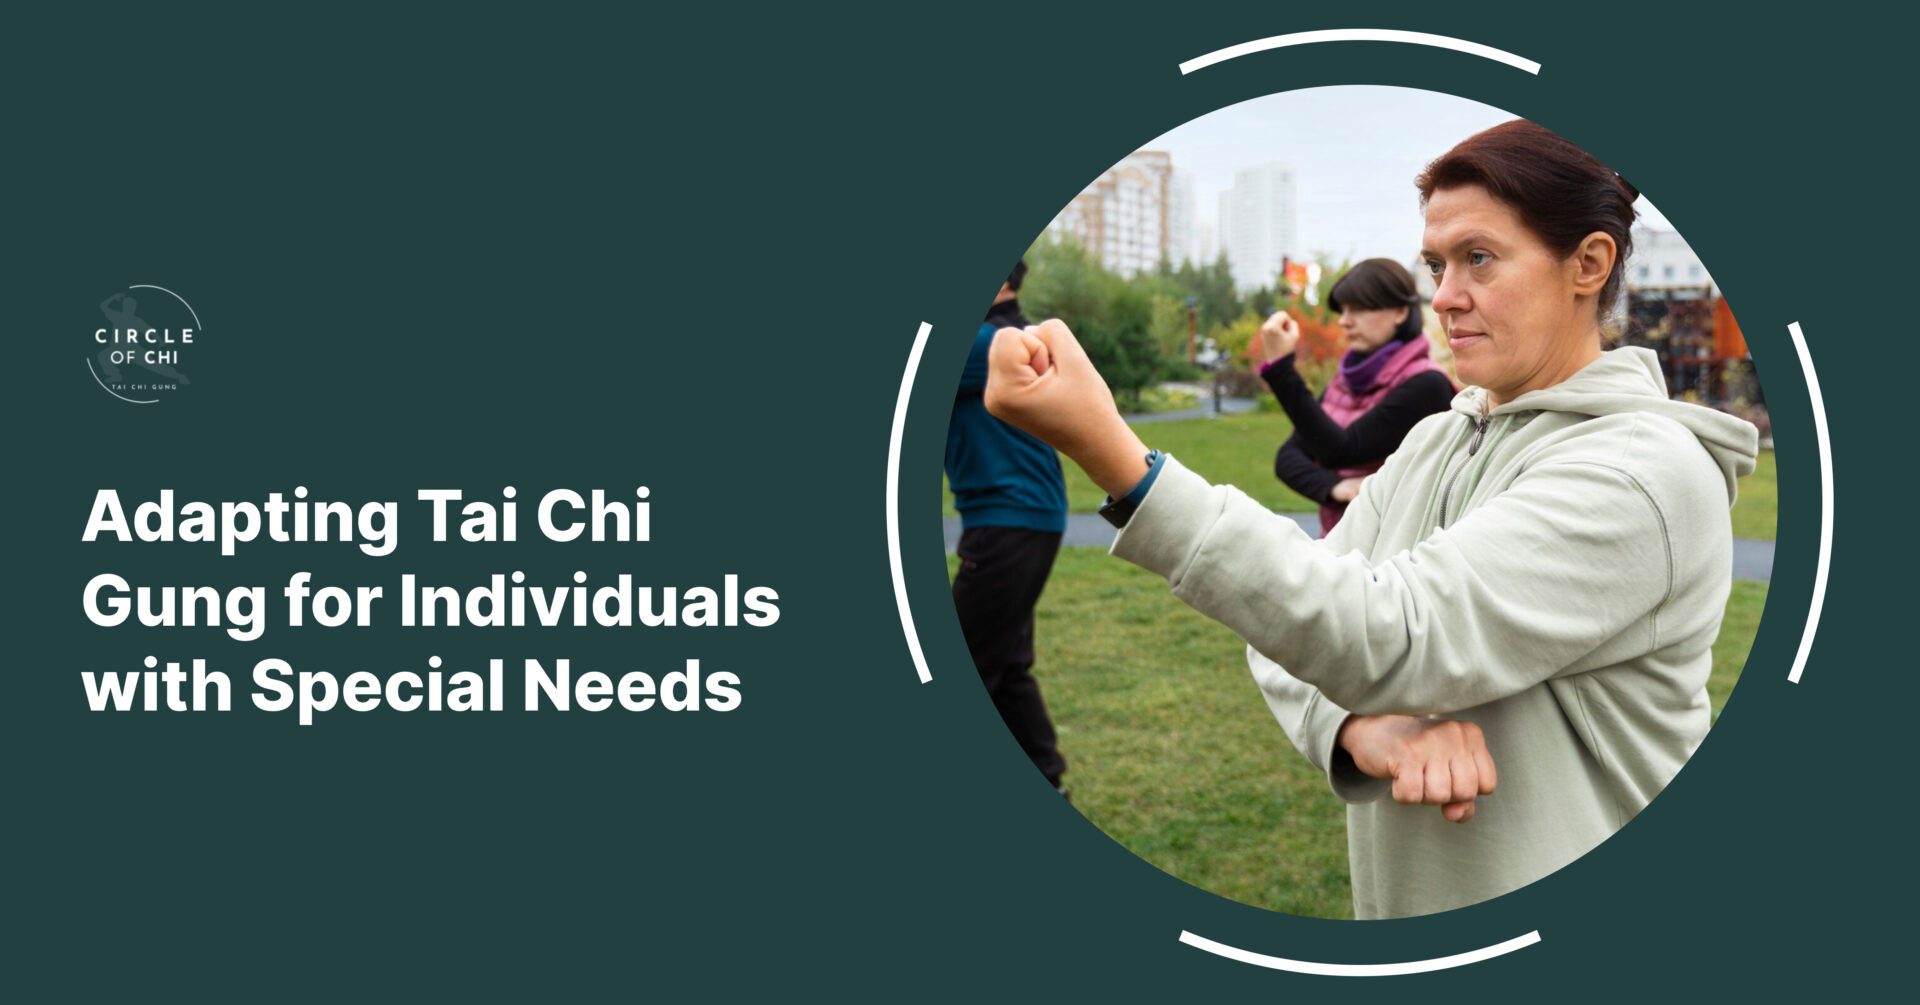 Adapting Tai Chi Gung for Individuals with Special Needs